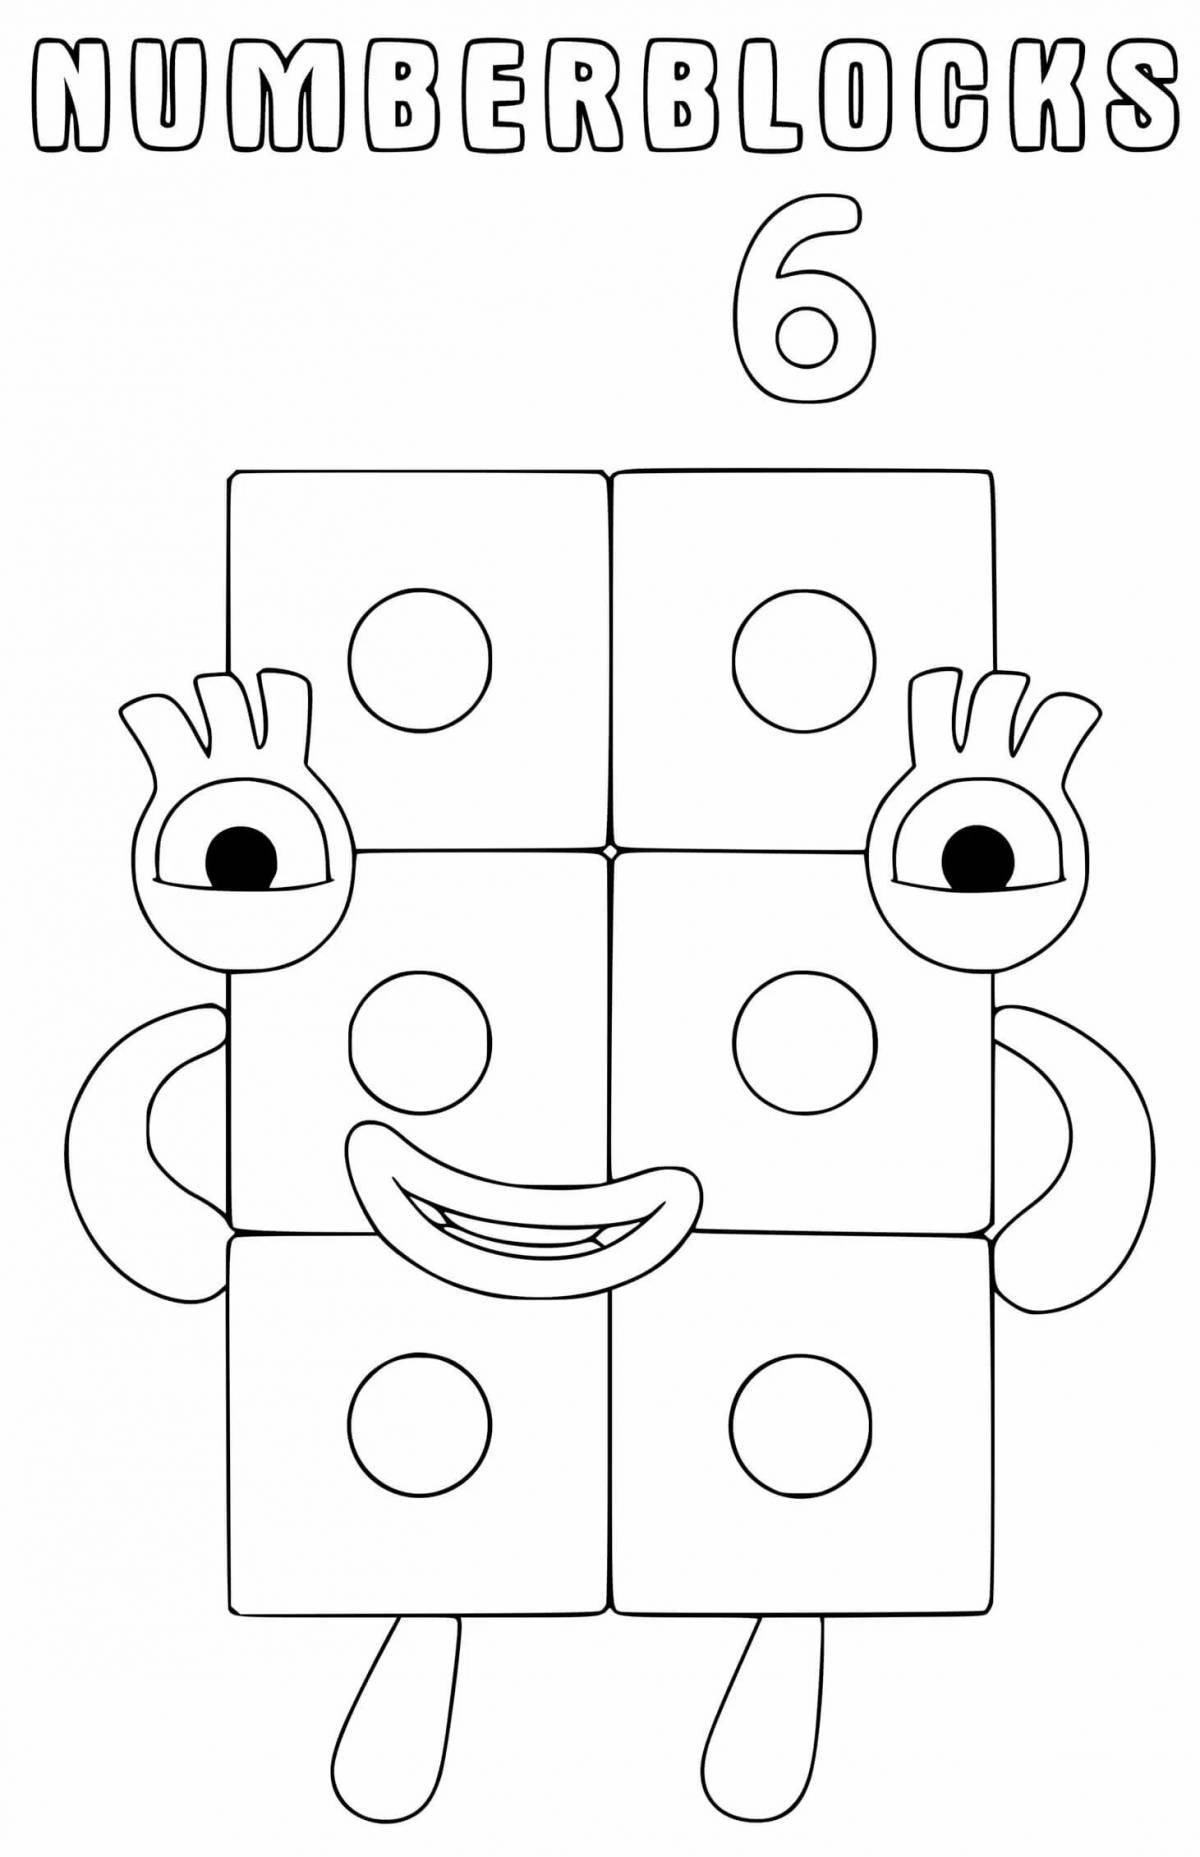 Adorable number block coloring page